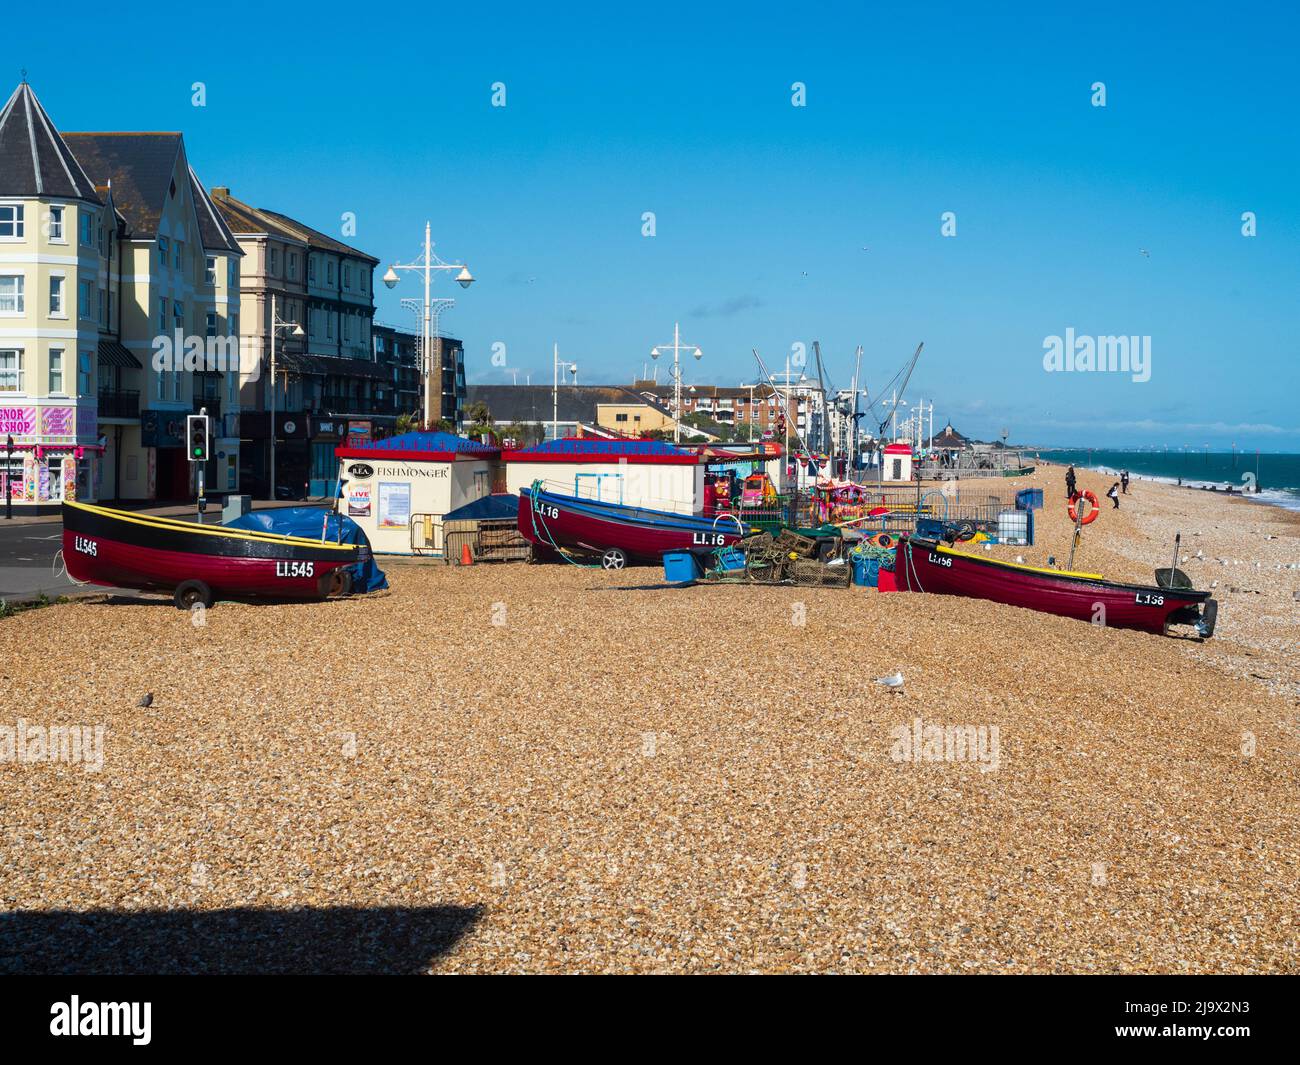 Inshore fishing boats drawn up on the shingle beach at Bognor Regis, West Sussex, UK Stock Photo